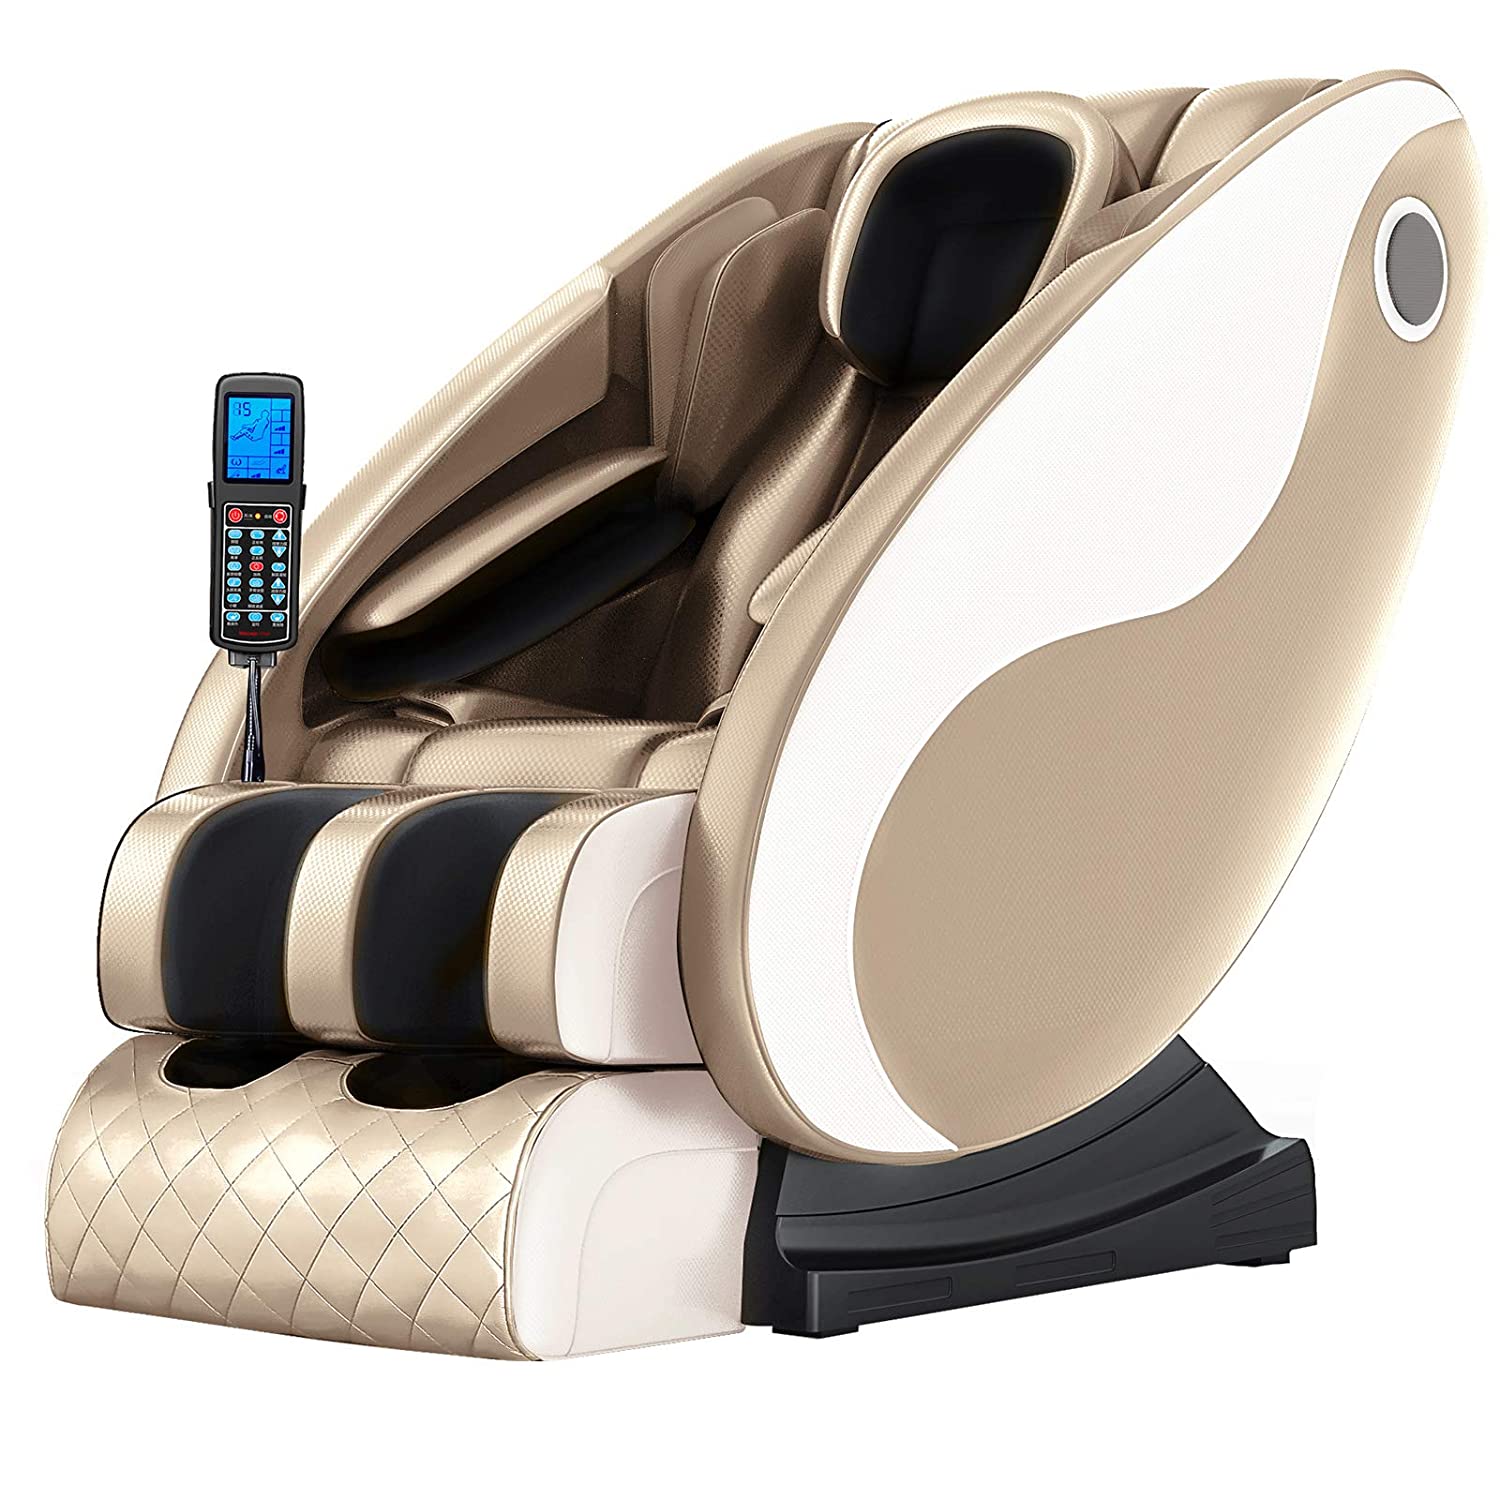 Nager Massage Chair Sofa Recliner Remote Control Foot Rest Full Body ...